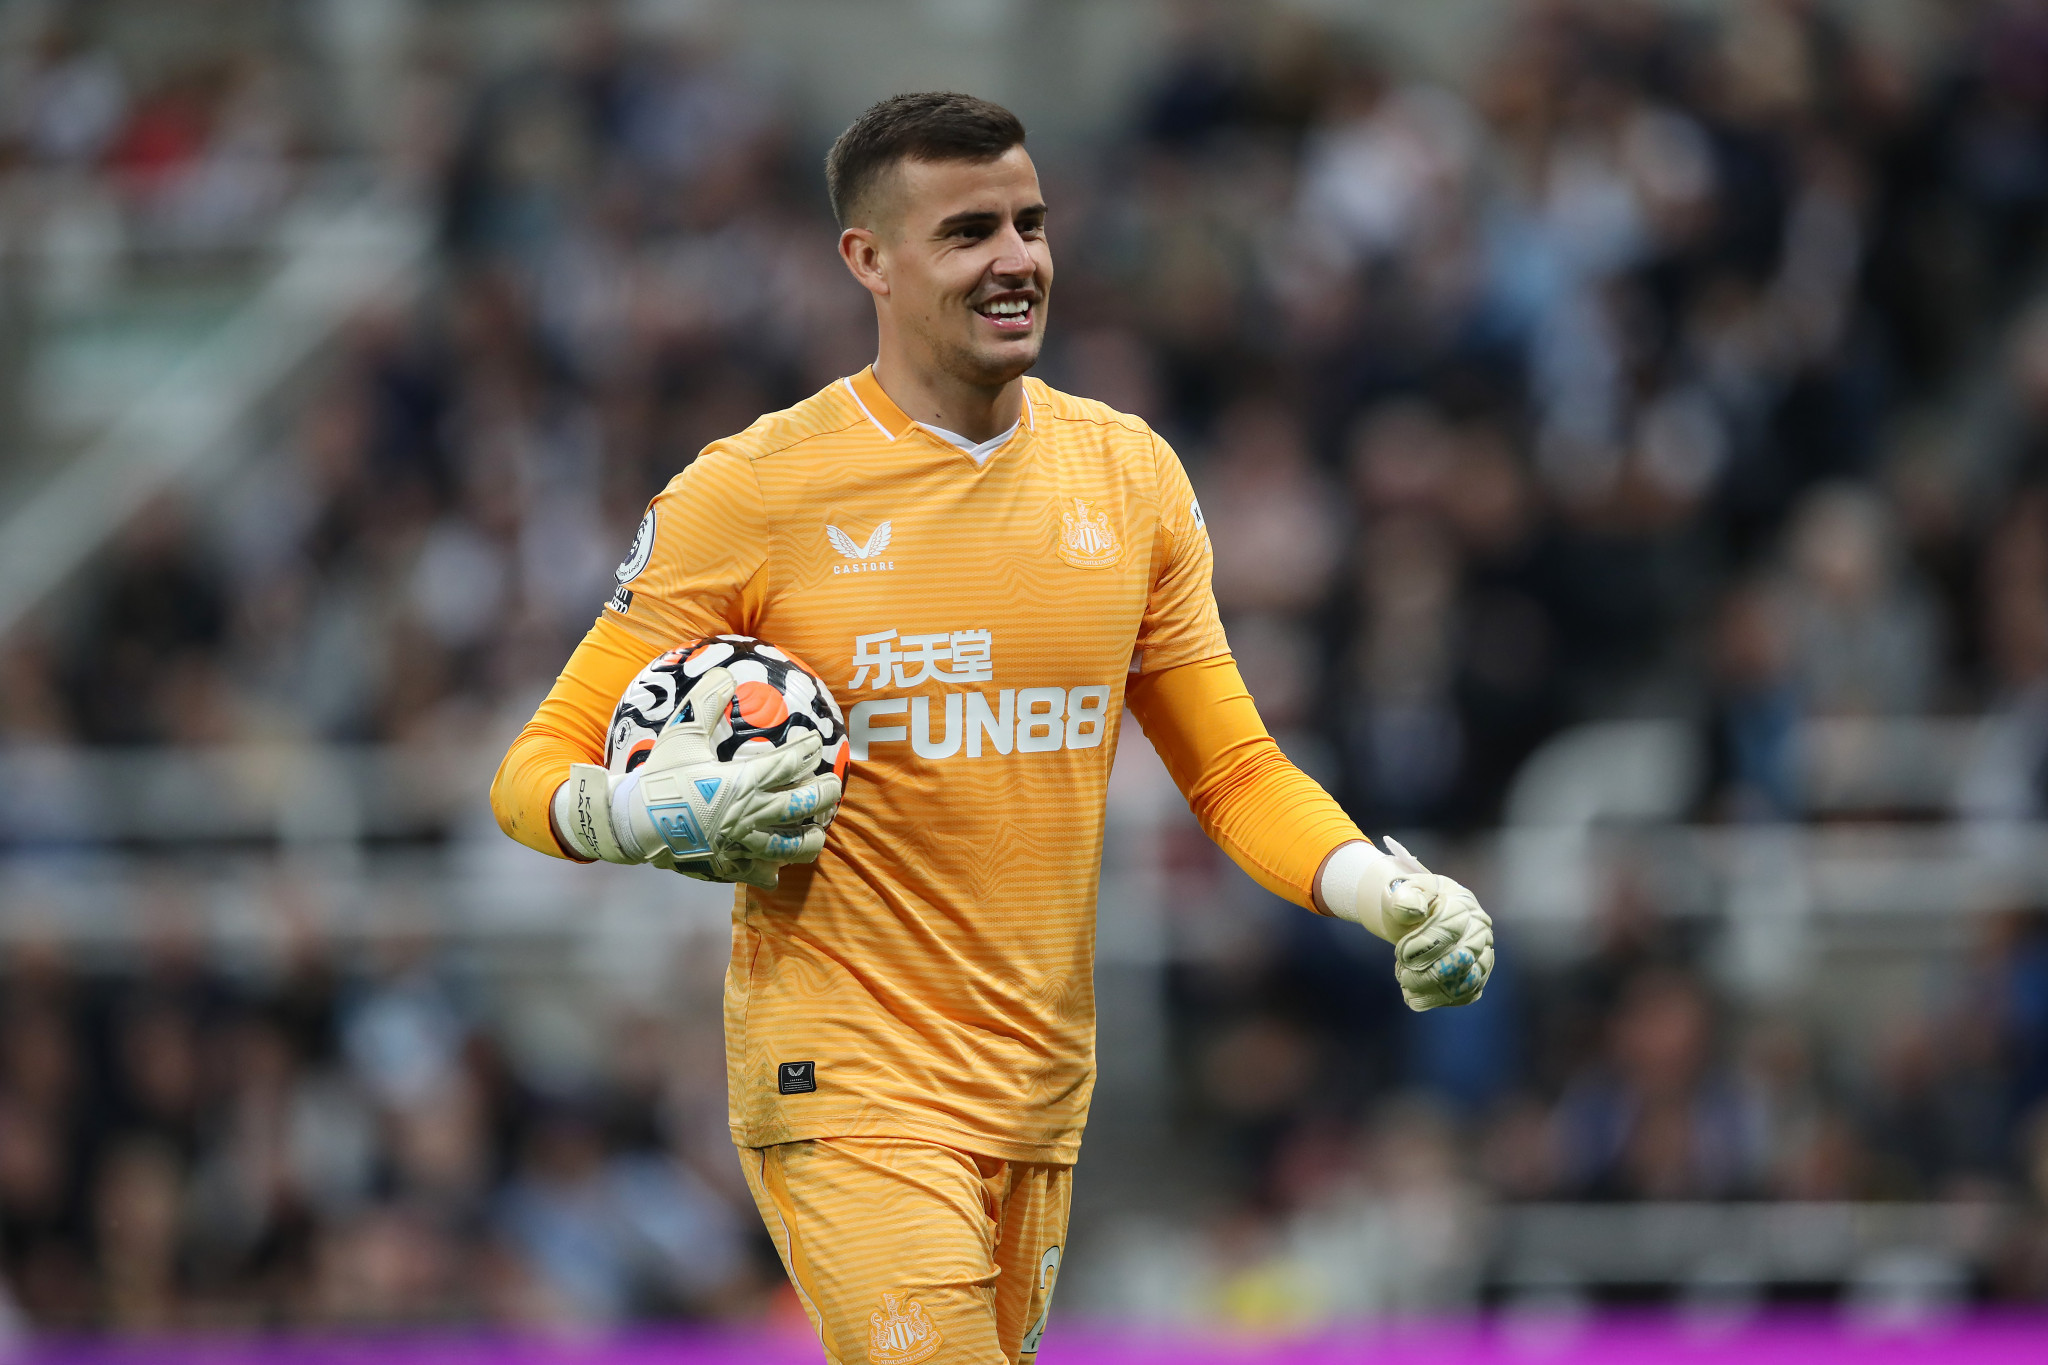 Newcastle United goalkeeper Karl Darlow spent time in hospital with COVID-19, amid vaccination reluctance at his club ©Getty Images